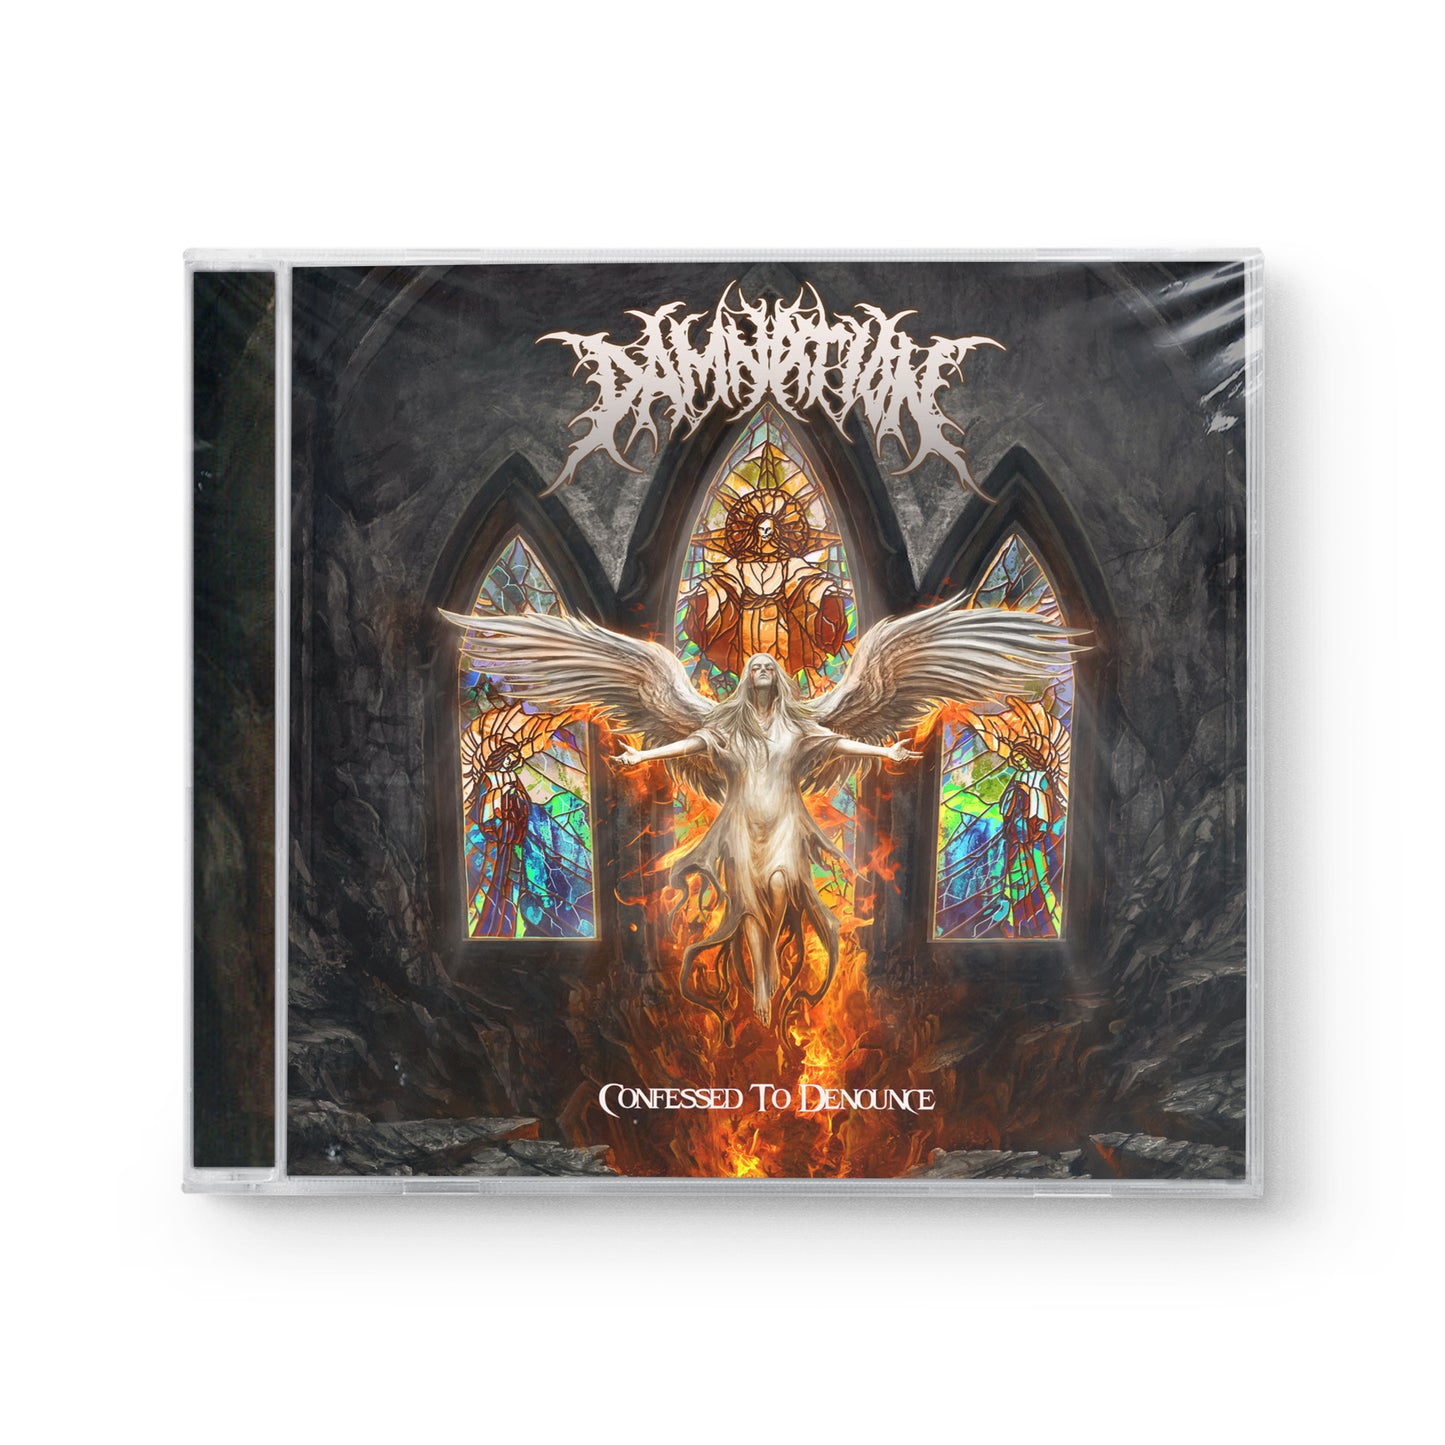 Damnation "Confessed To Denounce" CD